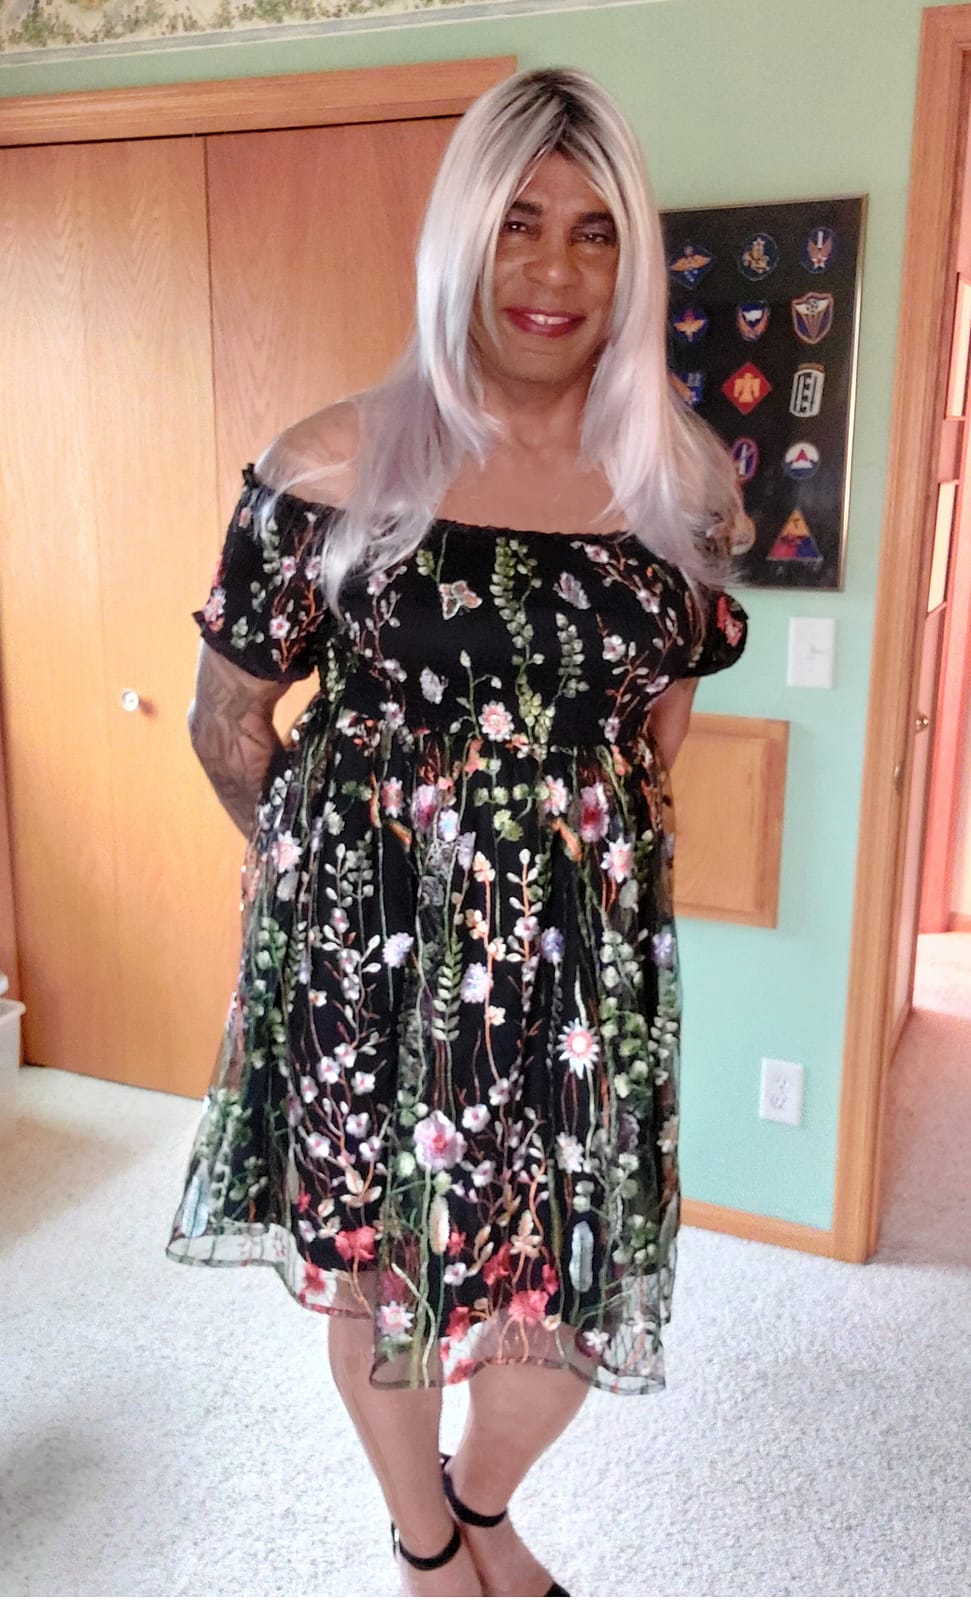 another new outfit – Crossdresser Heaven